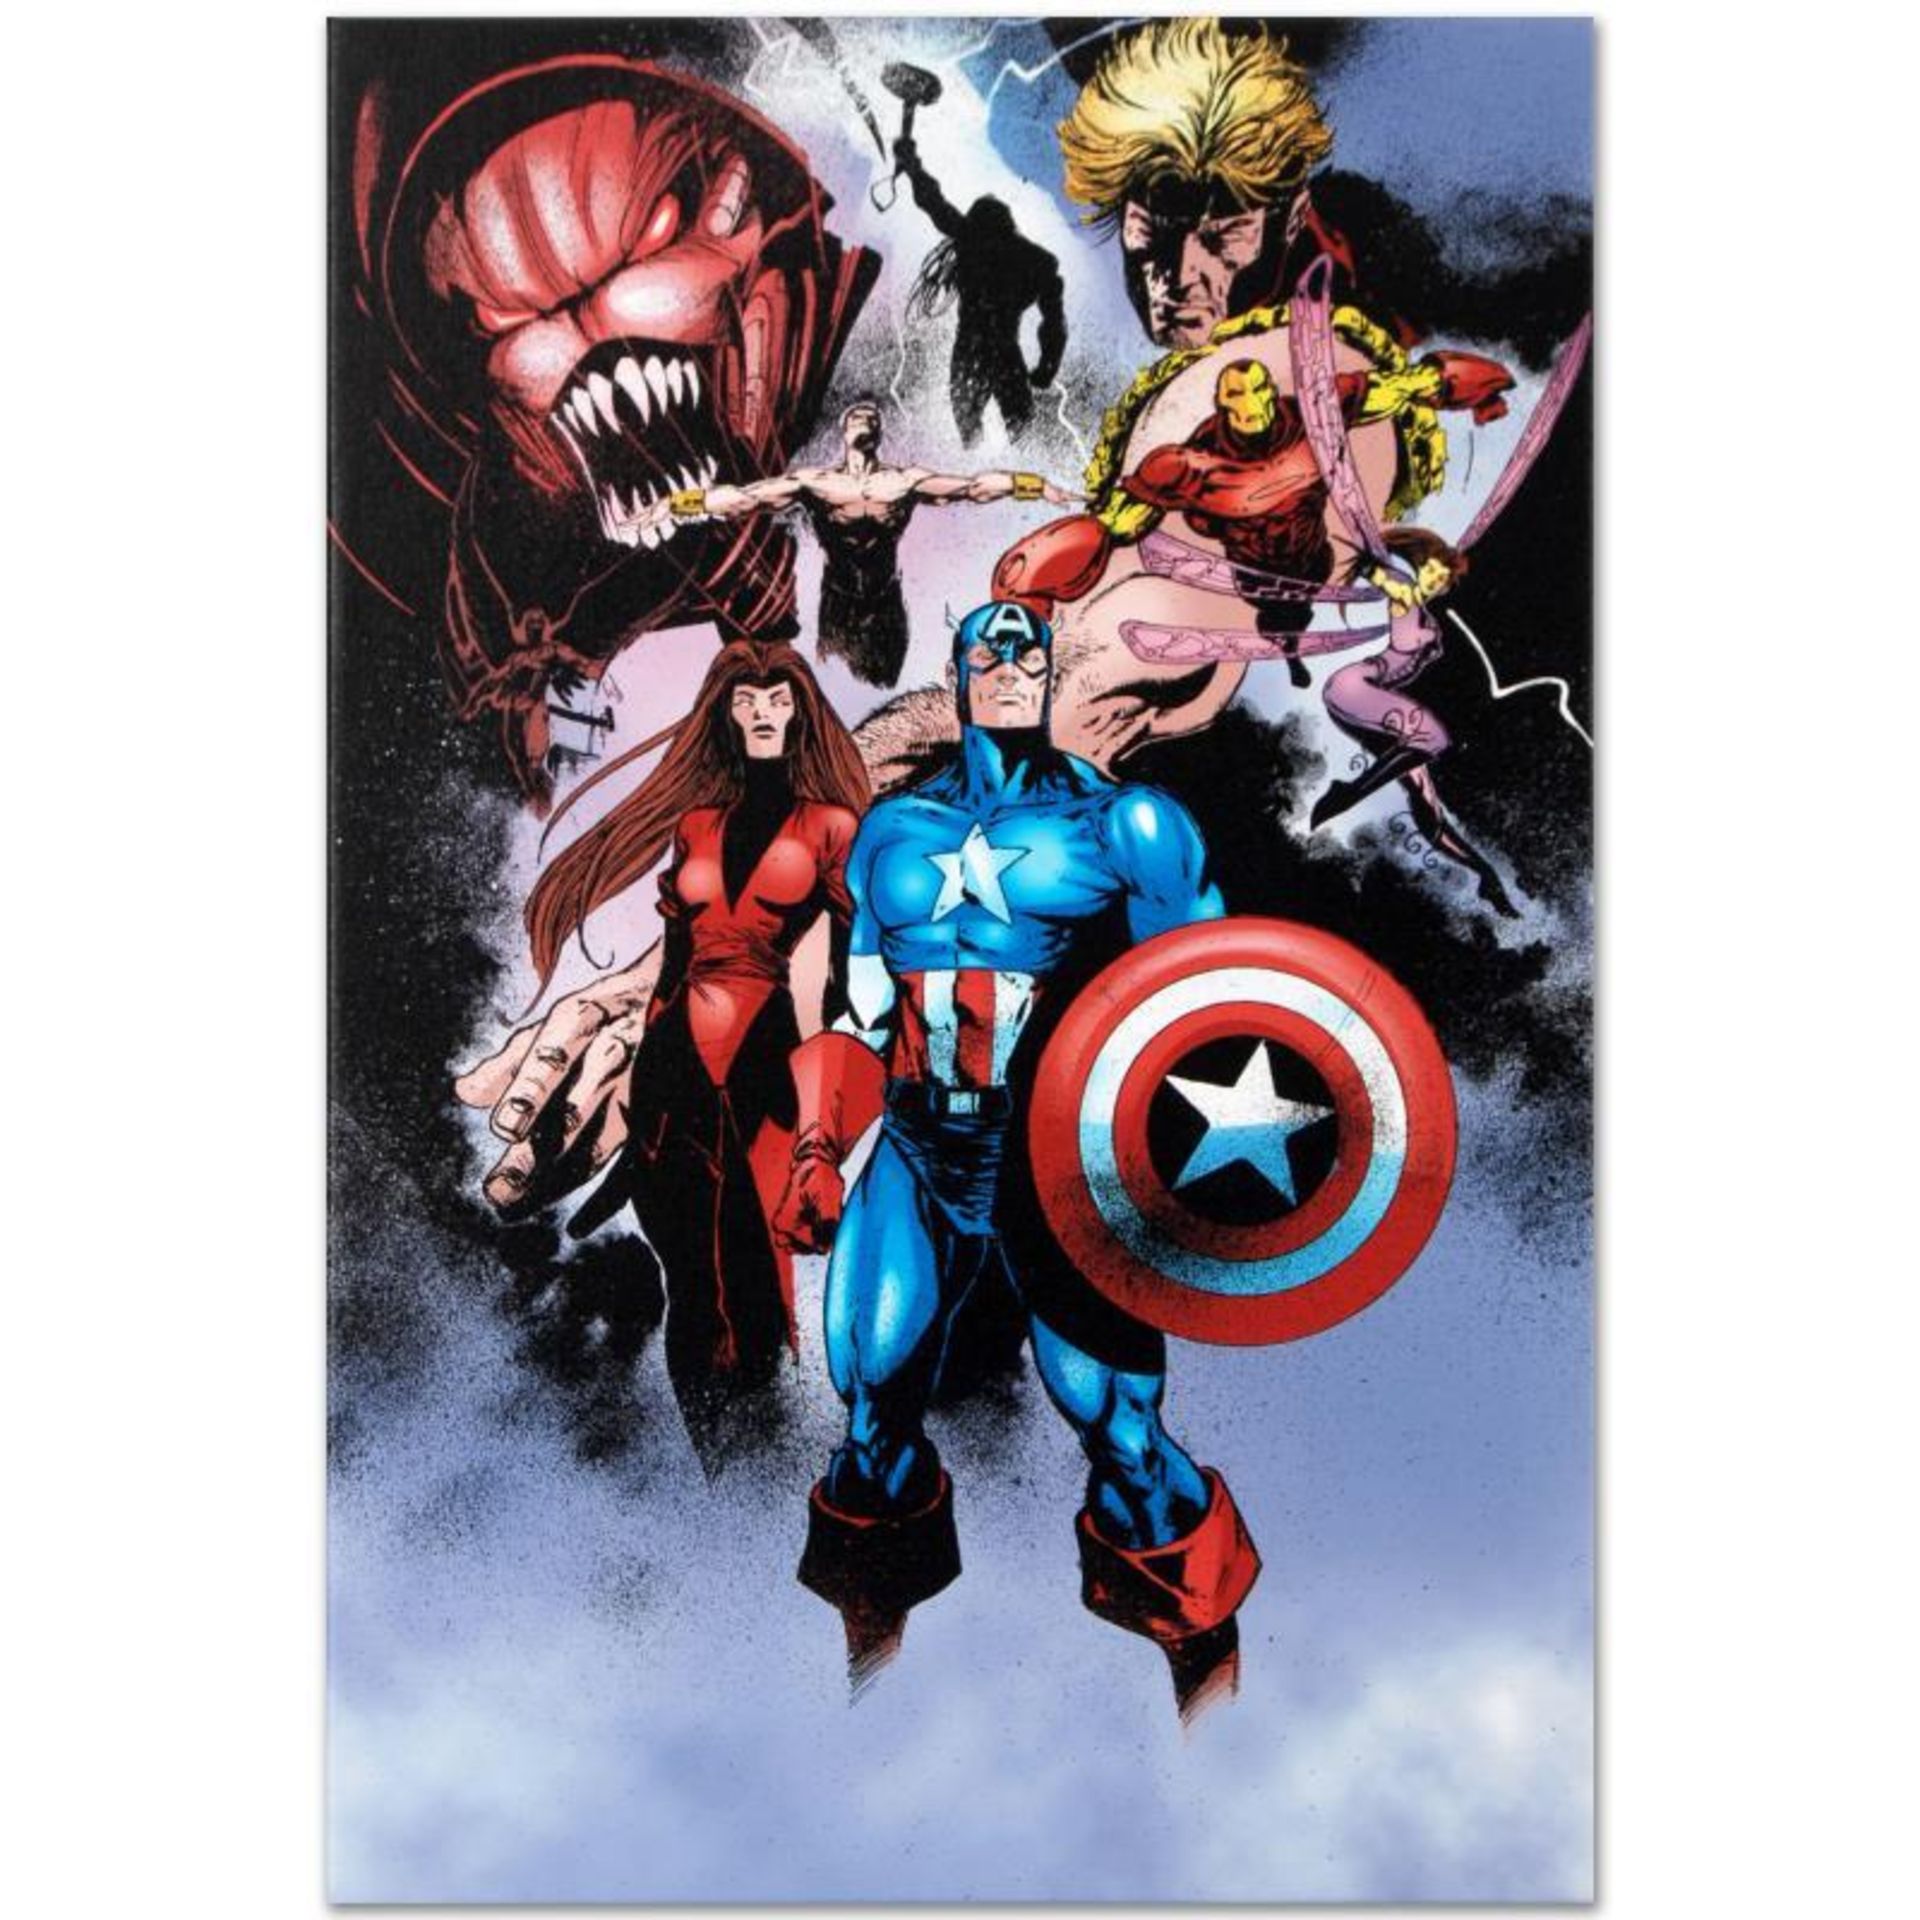 Marvel Comics "Avengers #99 Annual" Numbered Limited Edition Giclee on Canvas by